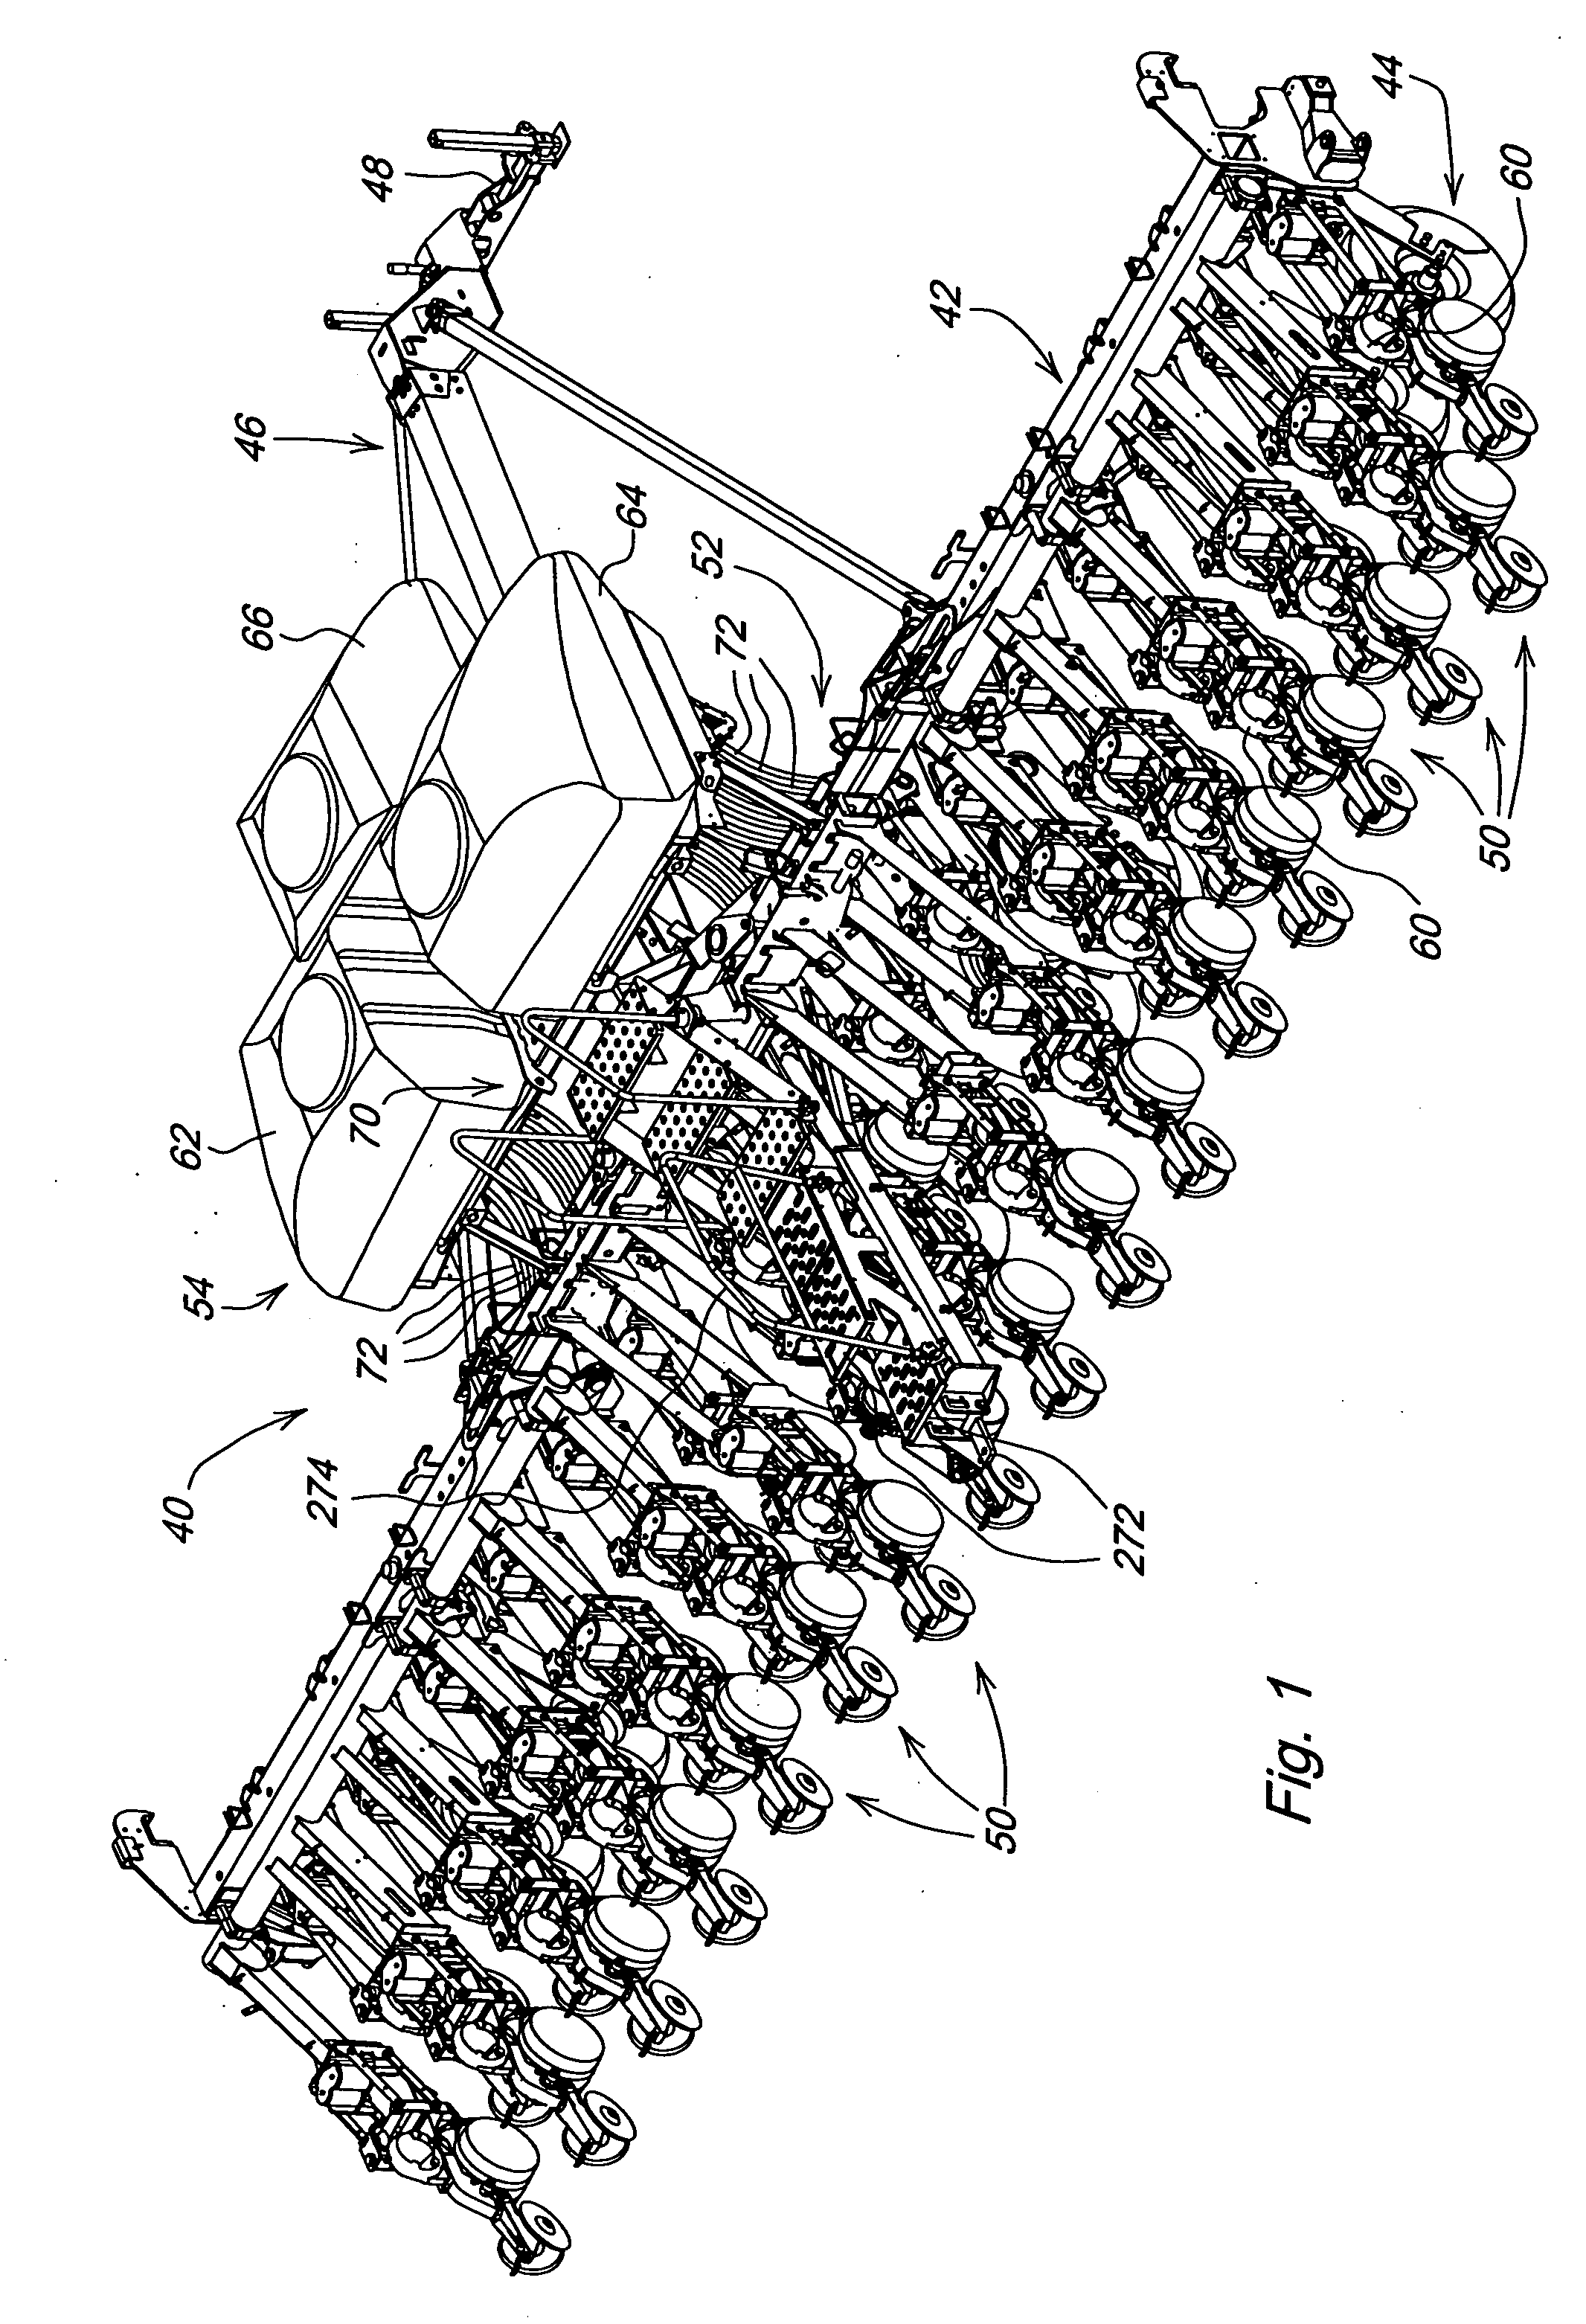 Seed hopper and routing structure for varying material delivery to row units